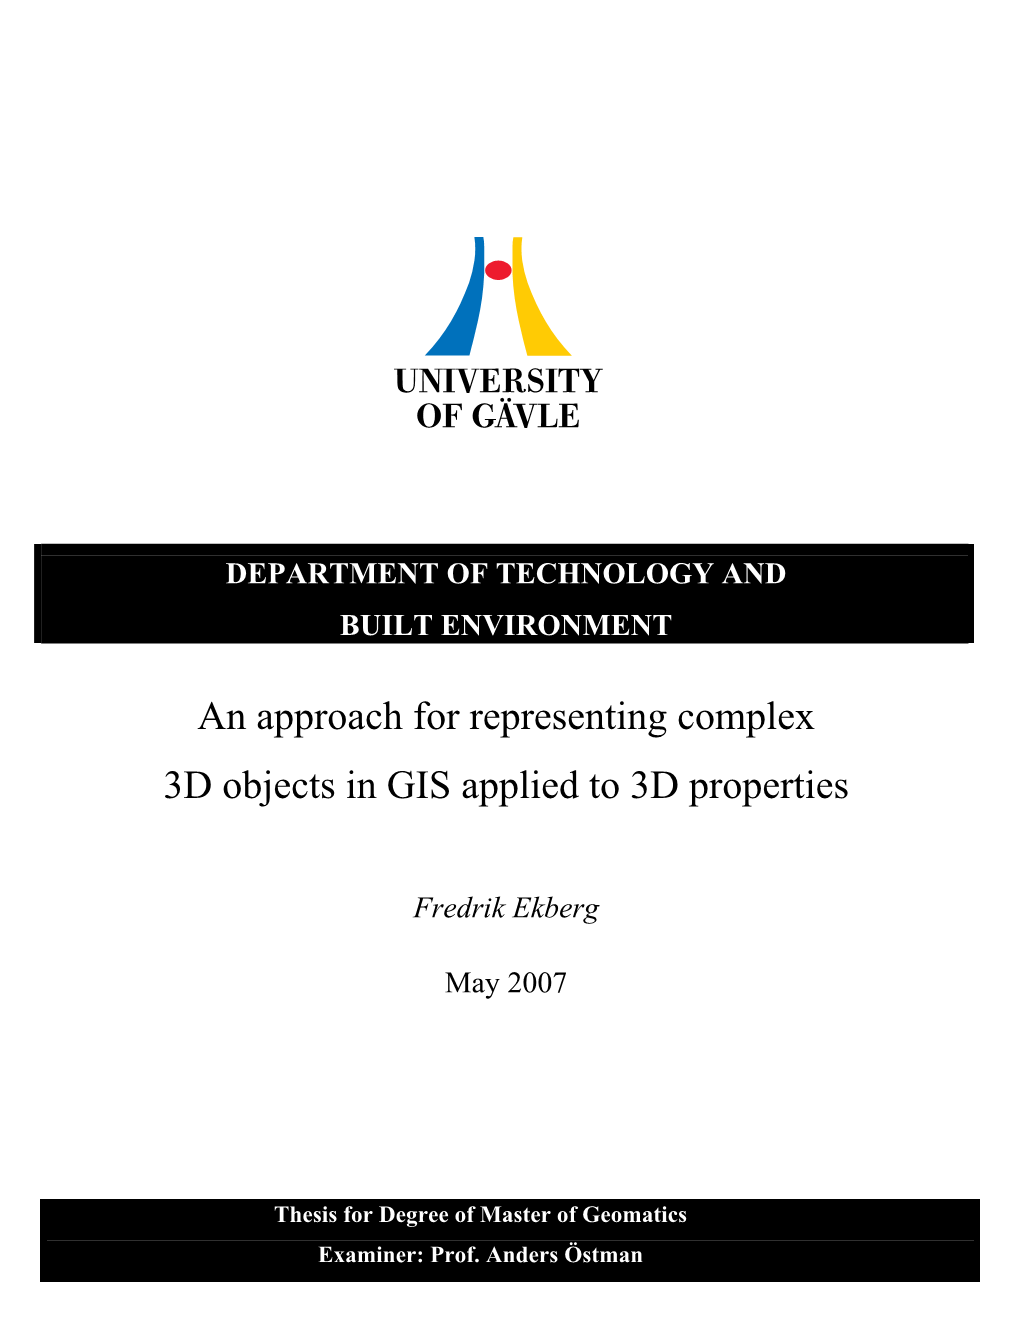 An Approach for Representing Complex 3D Objects in GIS Applied to 3D Properties